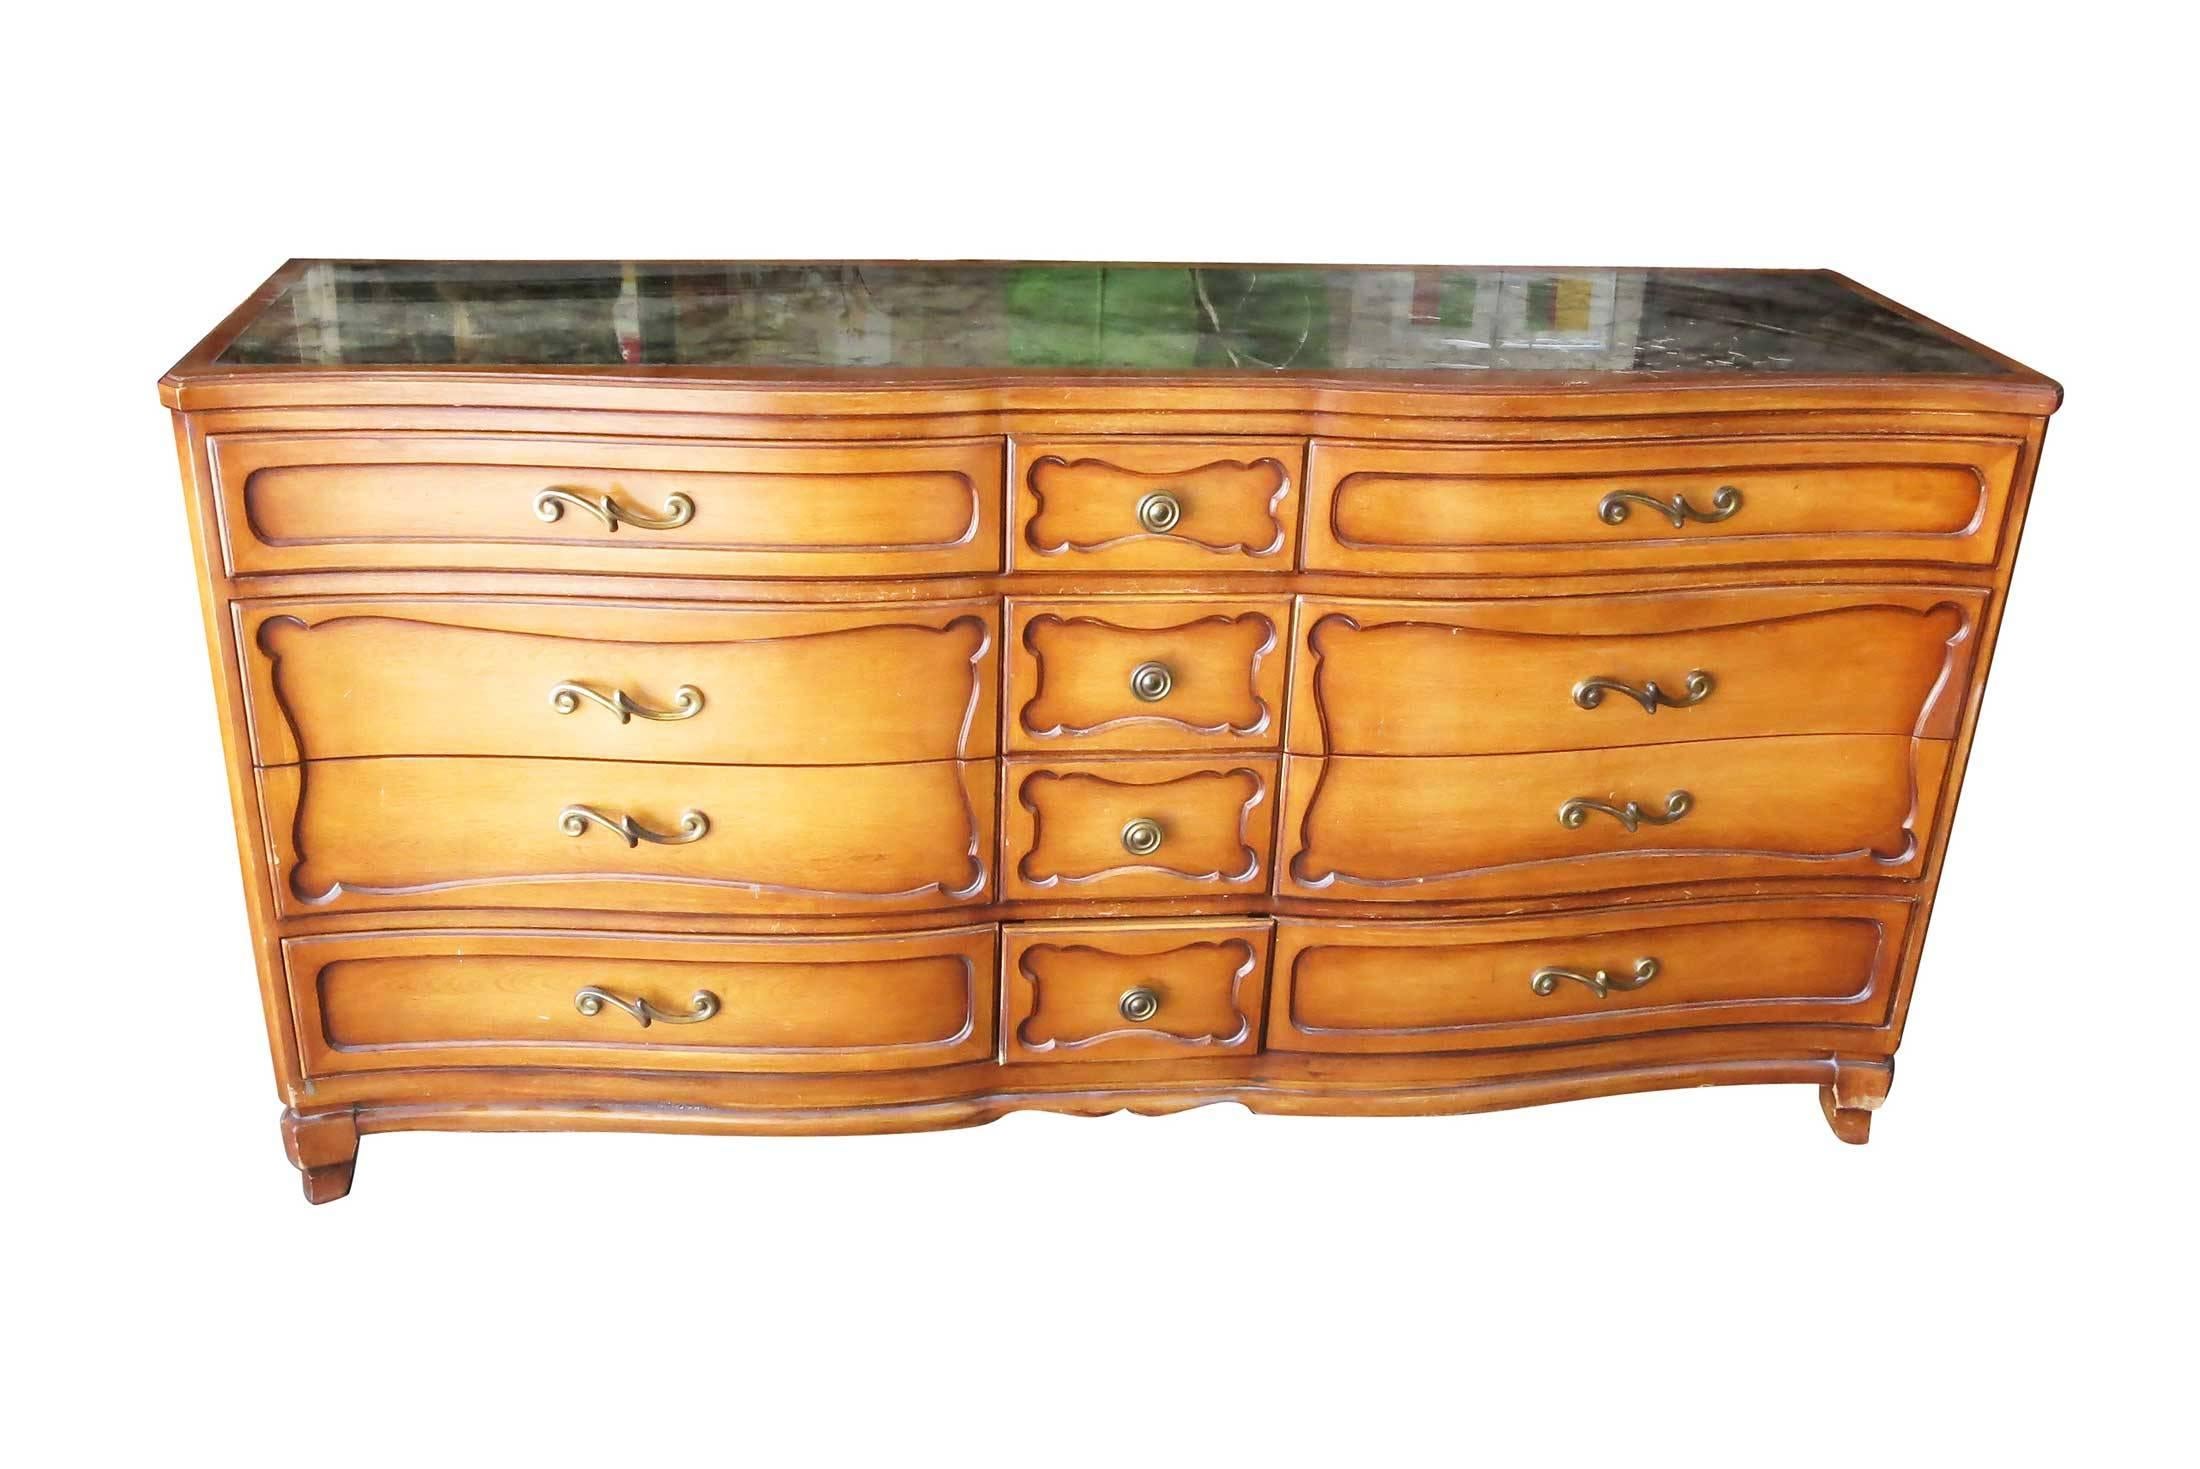 Beautiful dresser console by reputable RWAY furniture featuring a mercury glass mirrored glass top with bronze pulls and twelve drawers. 

Solid wood and in good vintage condition for its age. The dresser shows surface wear from age/use, along